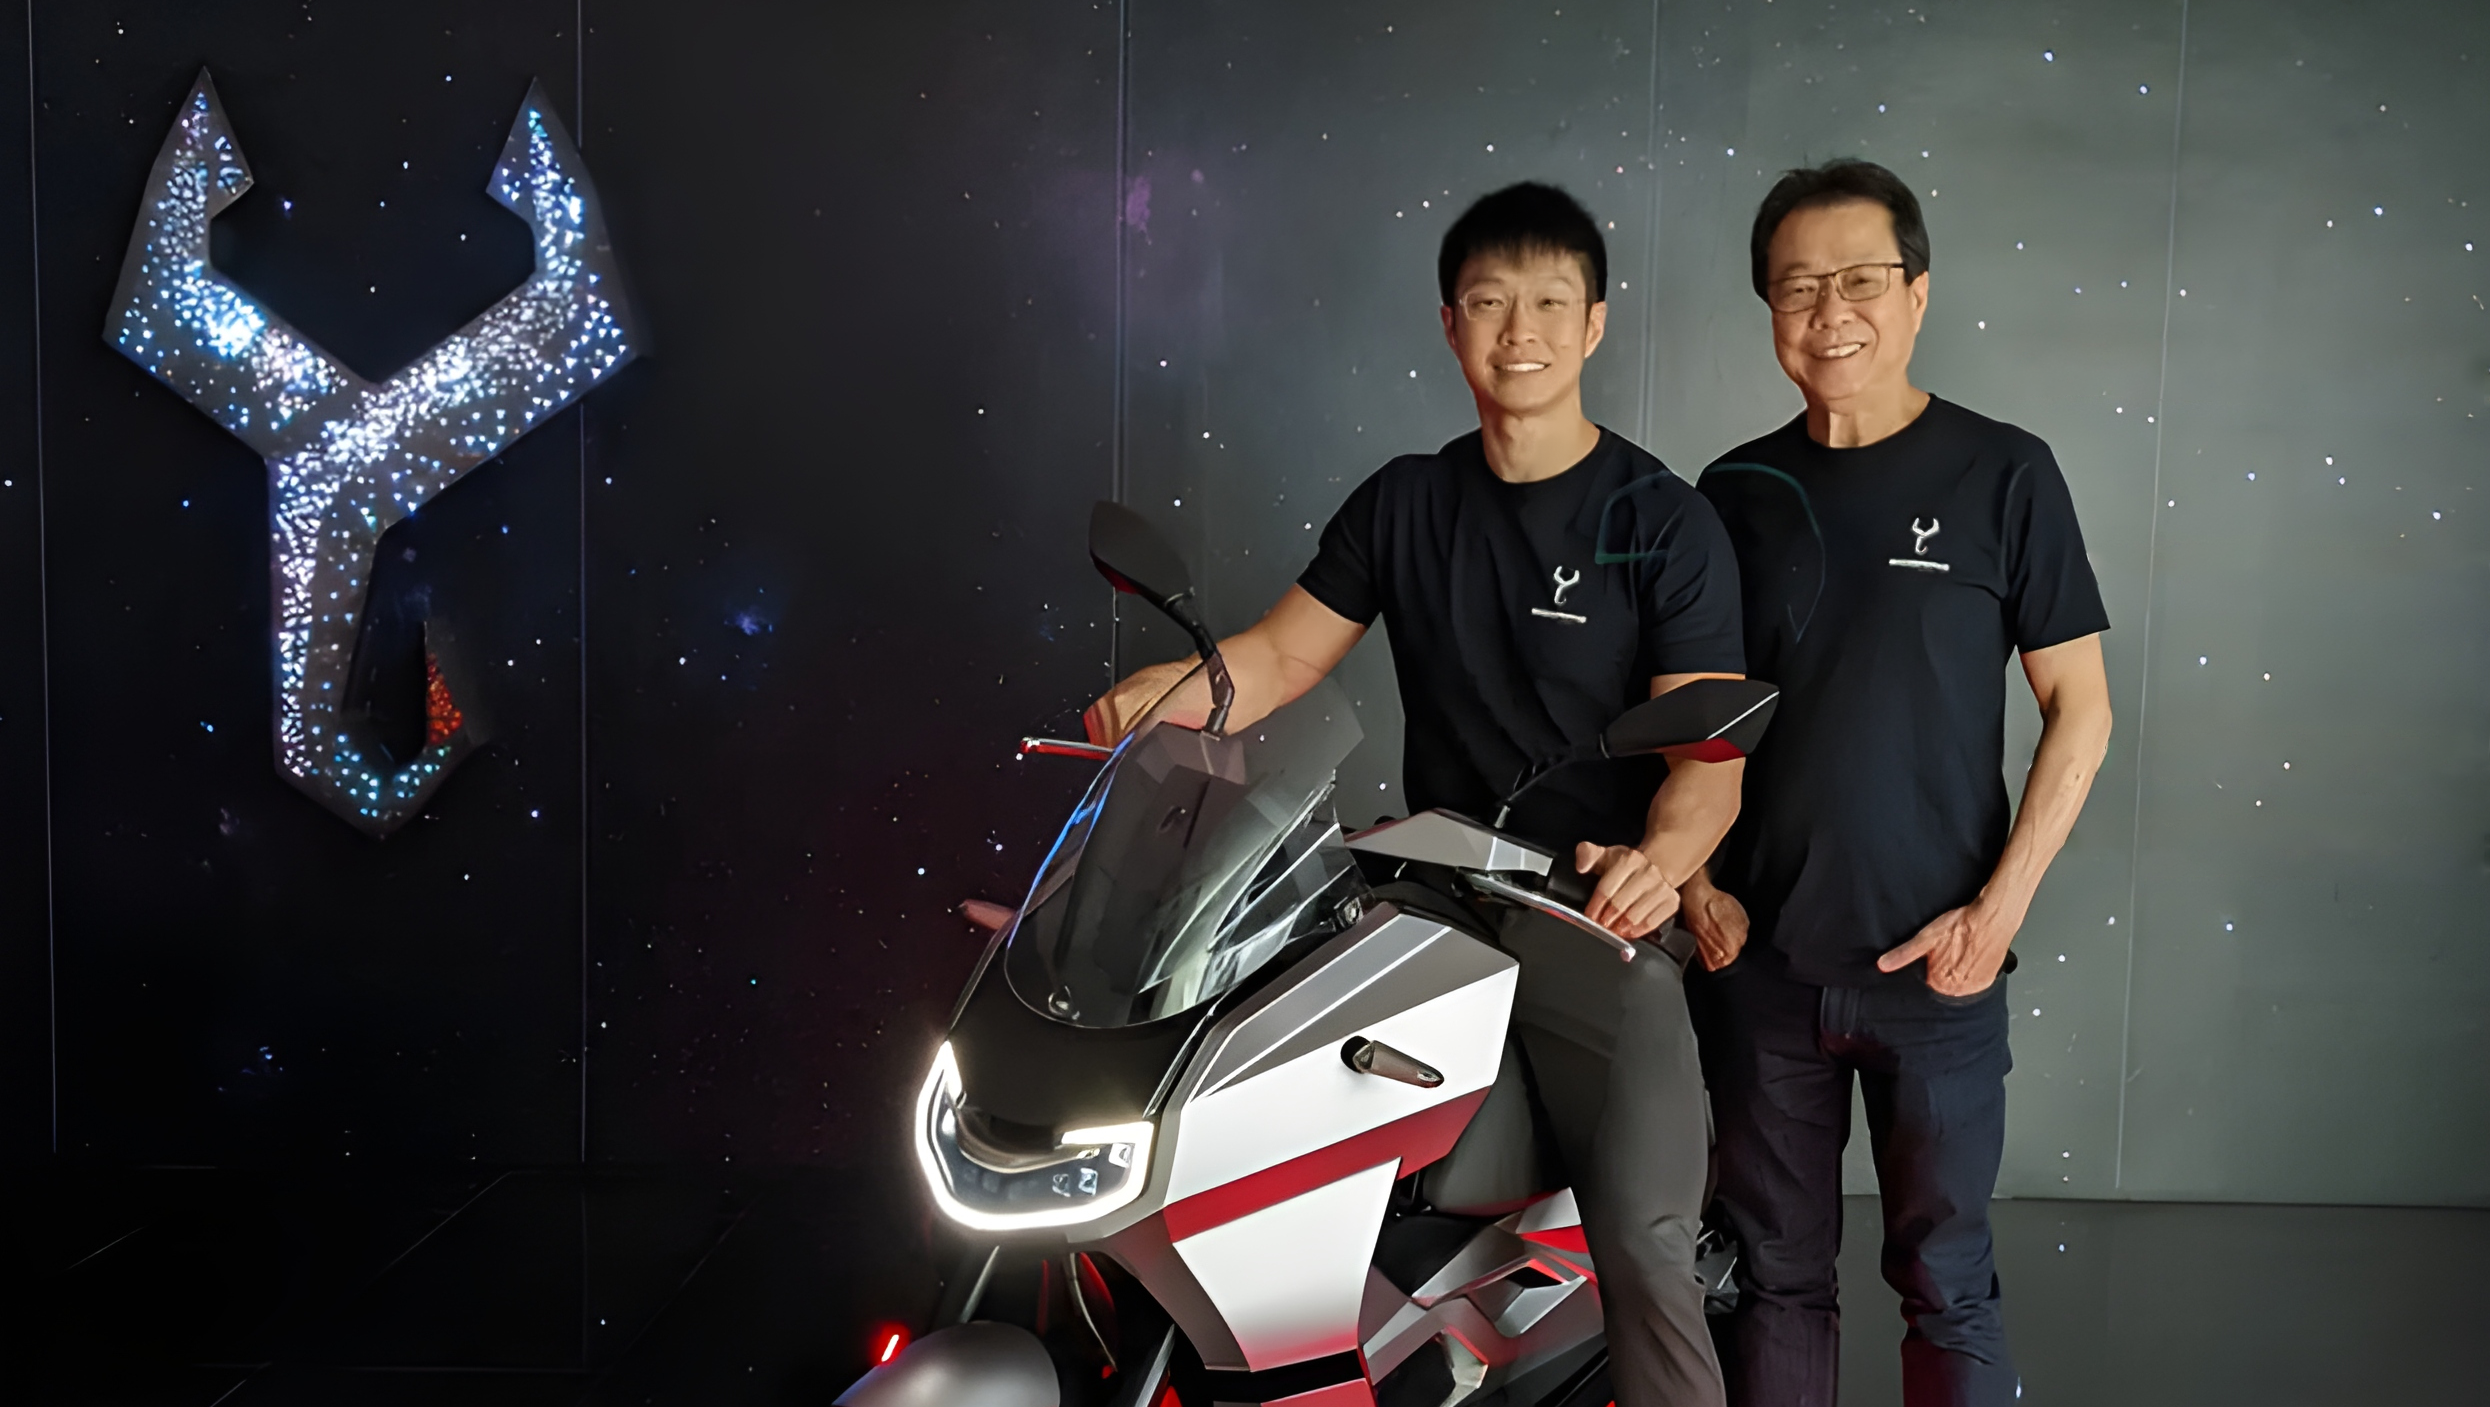 Scorpio Electric partners with distributors in 4 countries ahead of e-bike launch